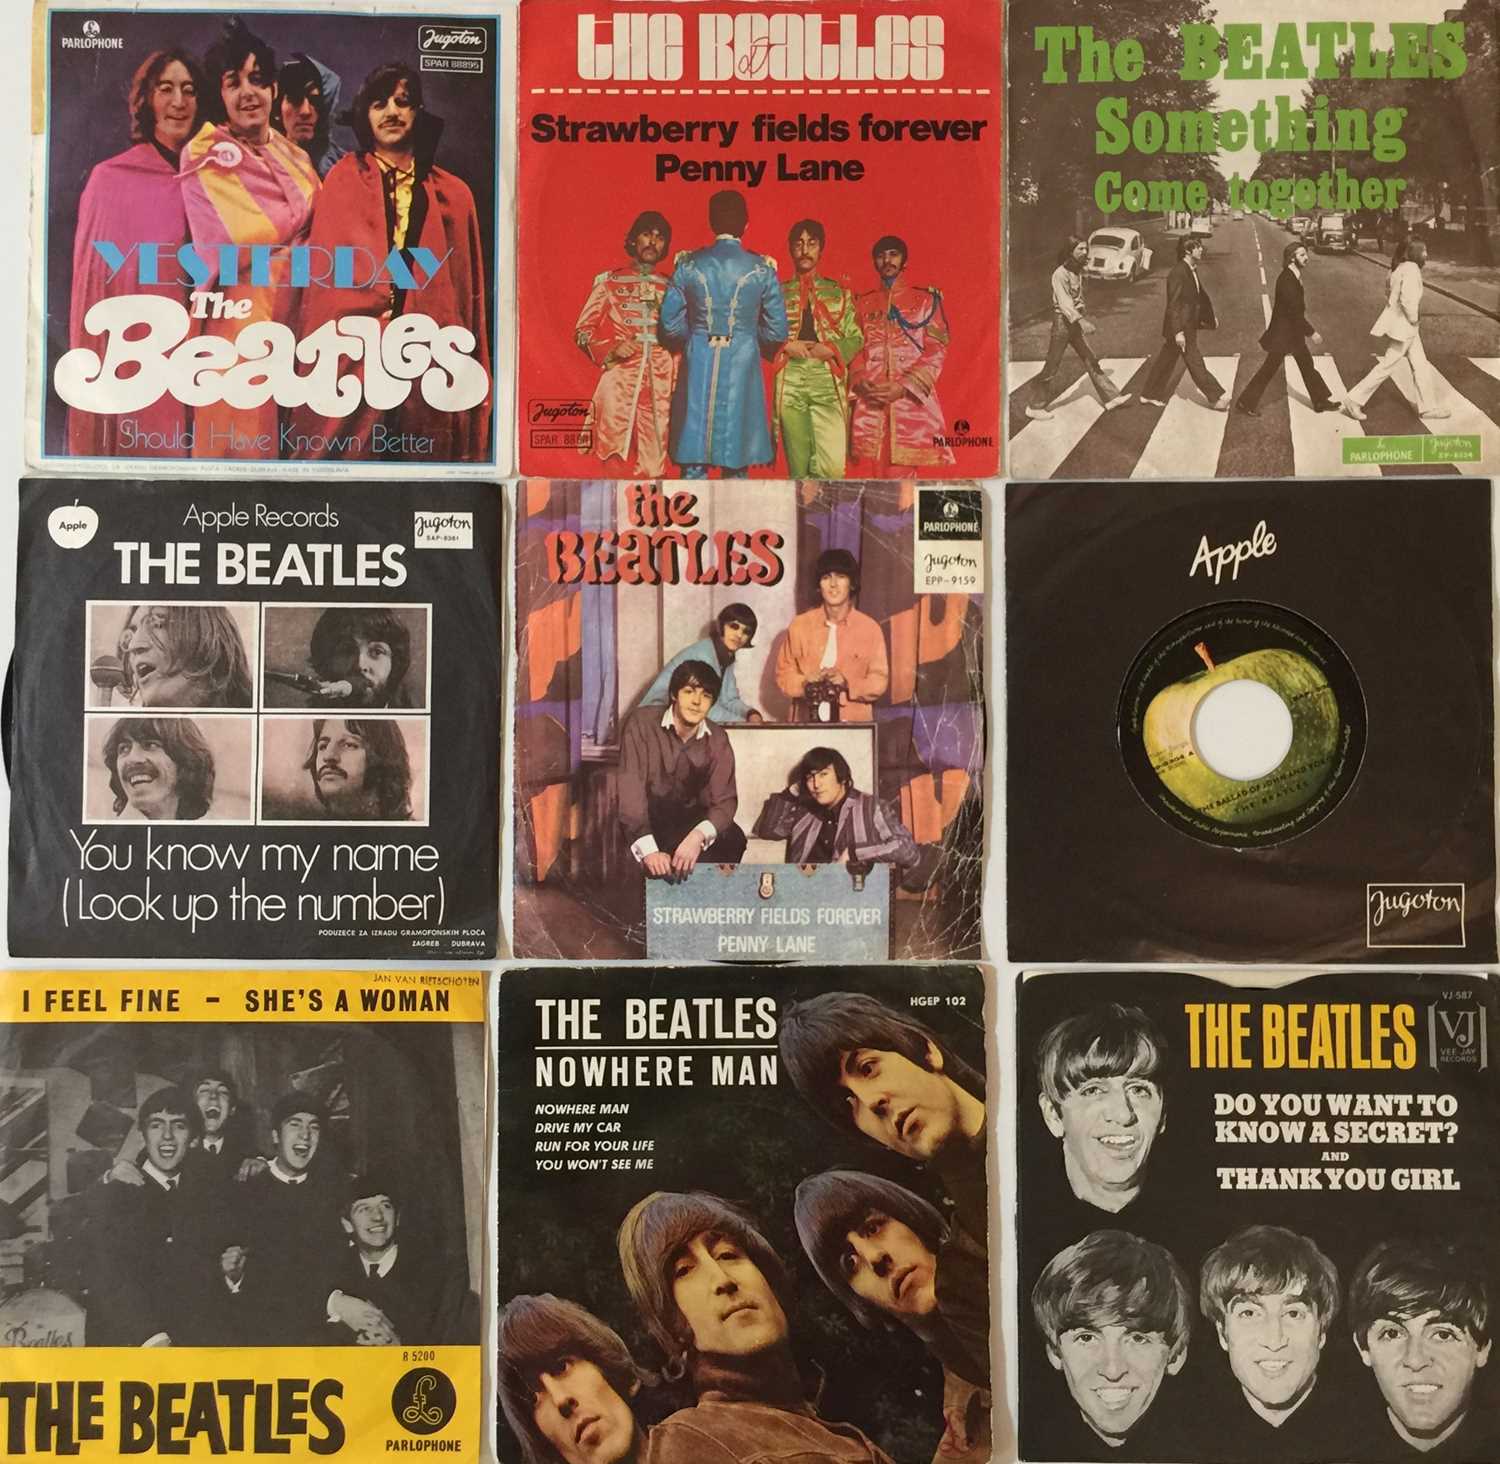 Lot 47 - THE BEATLES - OBSCURITIES/ PRIVATE PRESSED 7'' COLLECTION